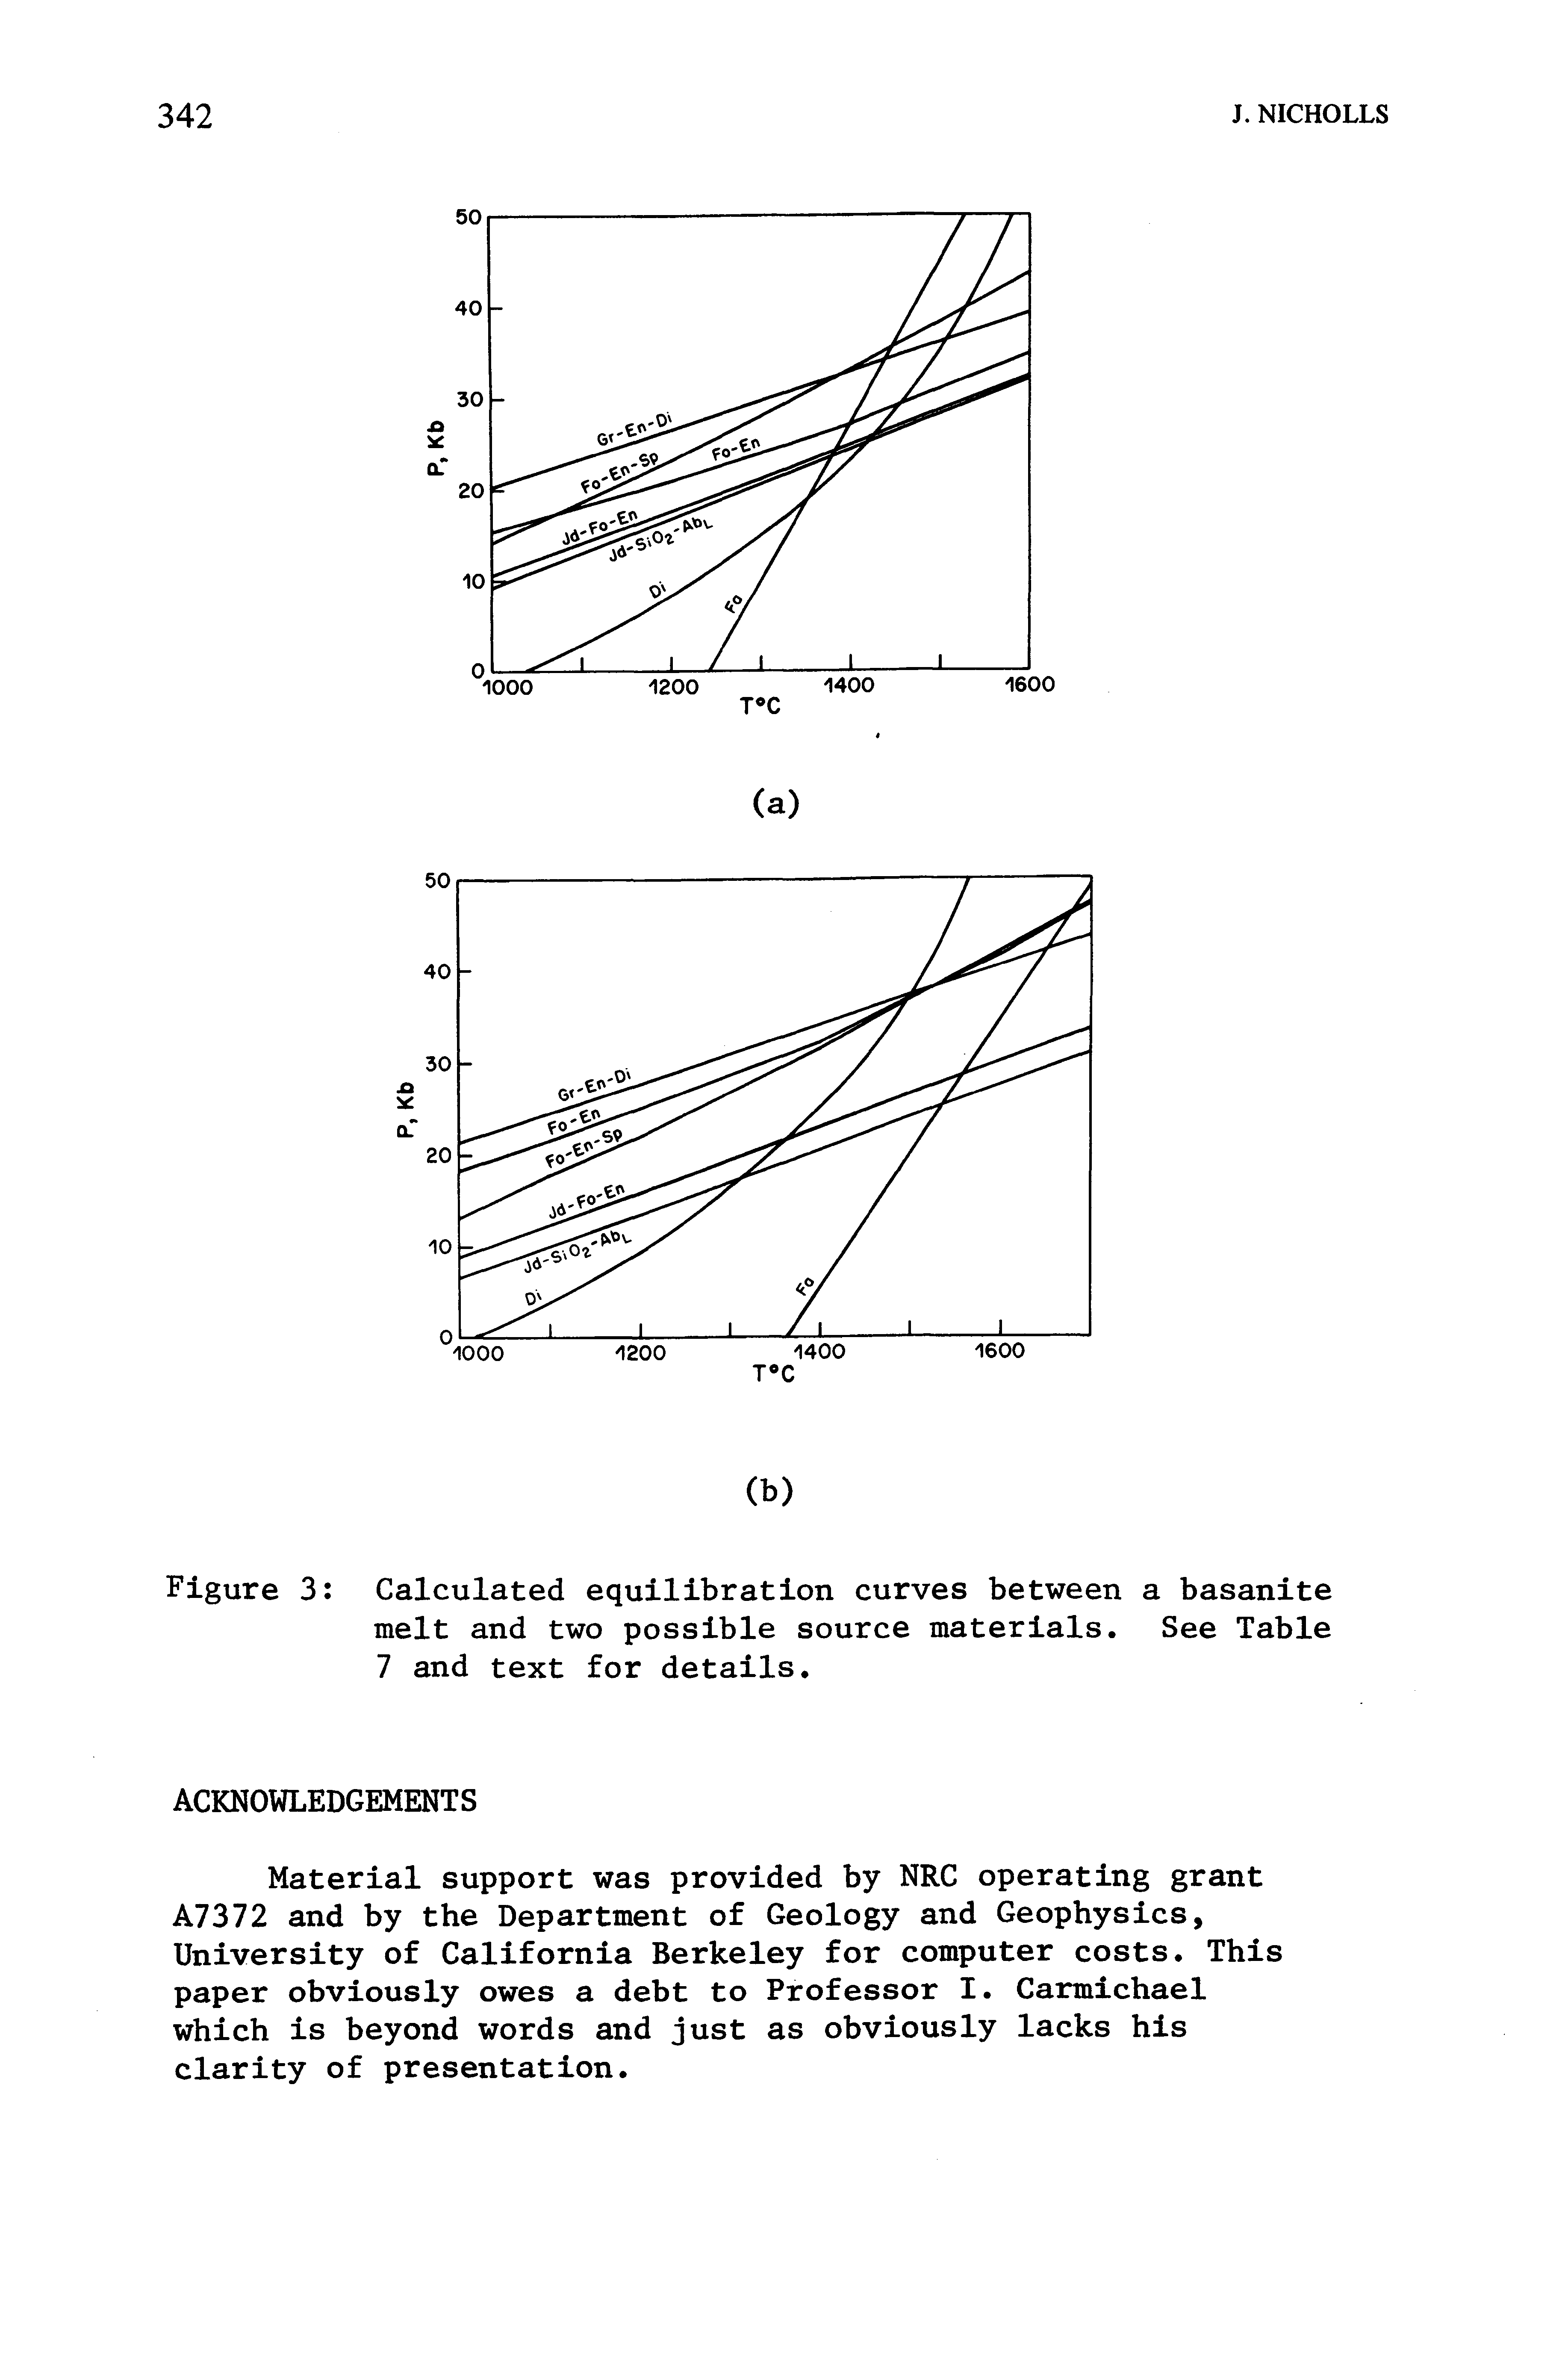 Figure 3 Calculated equilibration curves between a basanite melt and two possible source materials. See Table 7 and text for details.